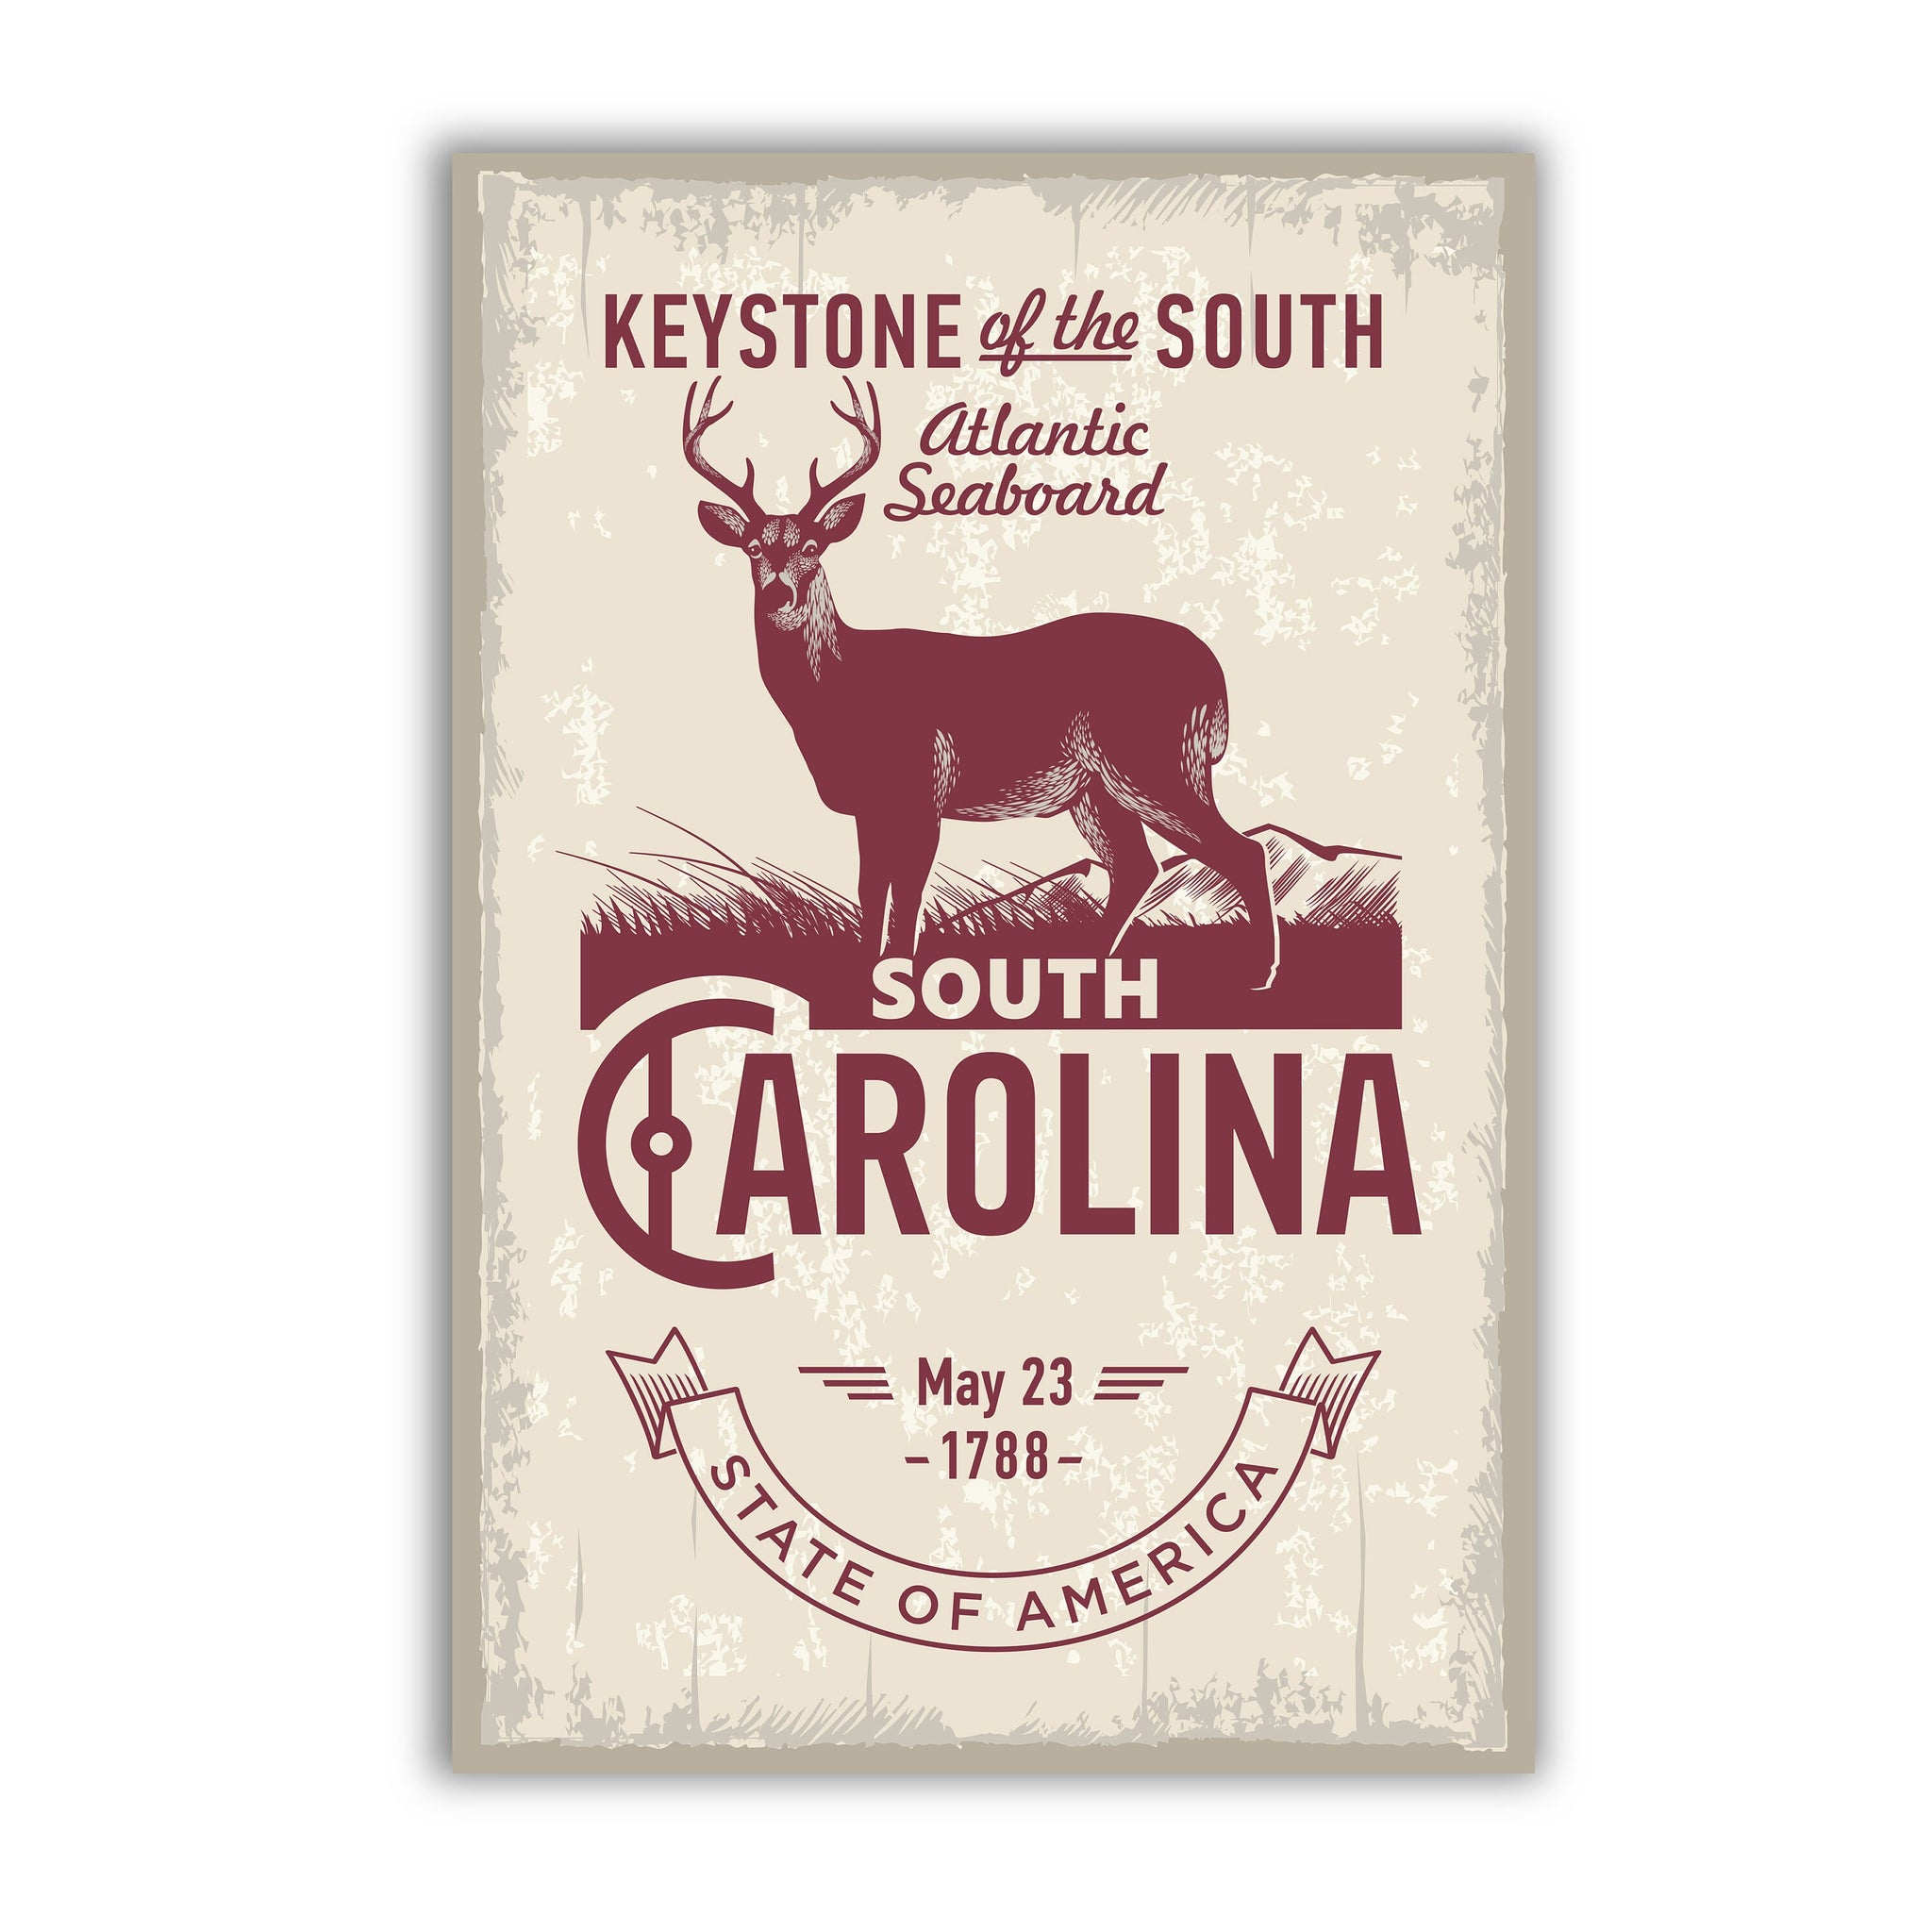 South Carolina State Symbol Poster, State Poster Print, Oregon State Emblem Poster, Retro Travel State Poster, Home and Office Wall Art